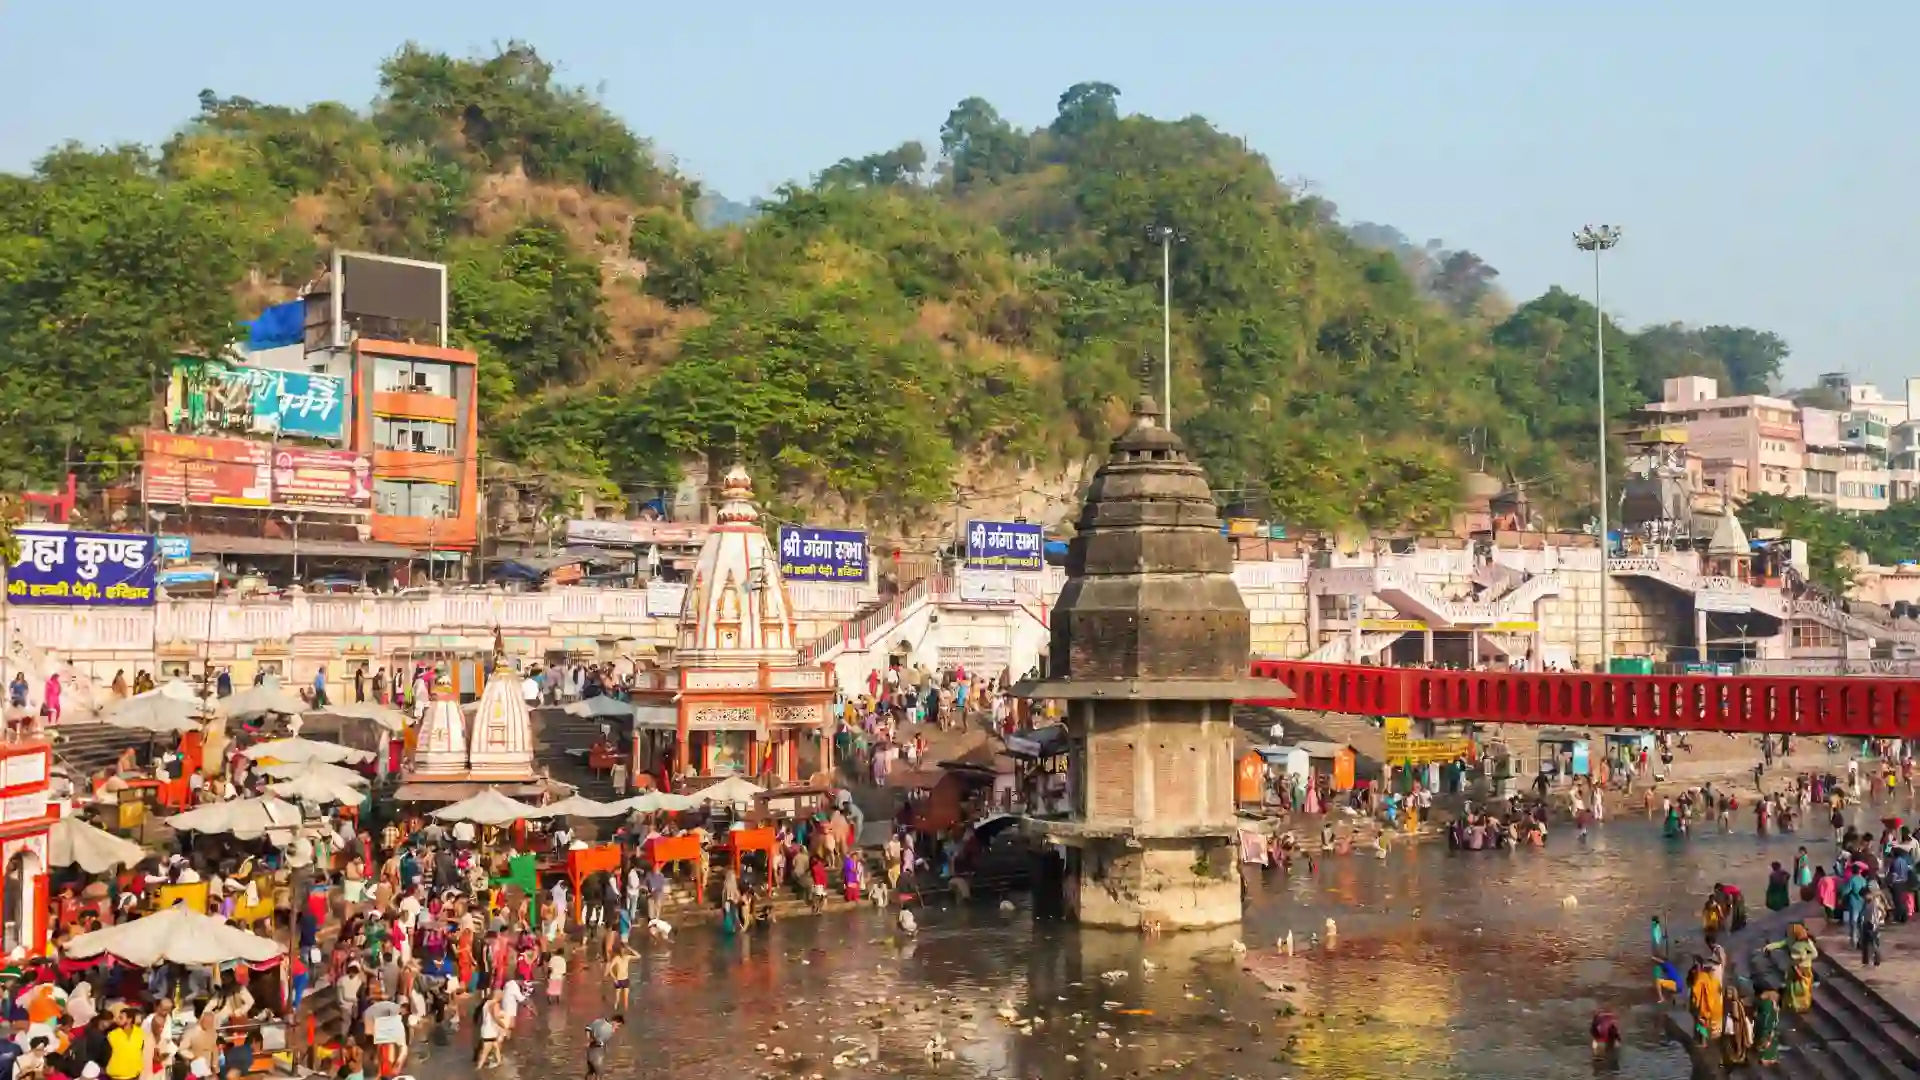 Kumbh Mela Tour - Unque Things to do in India